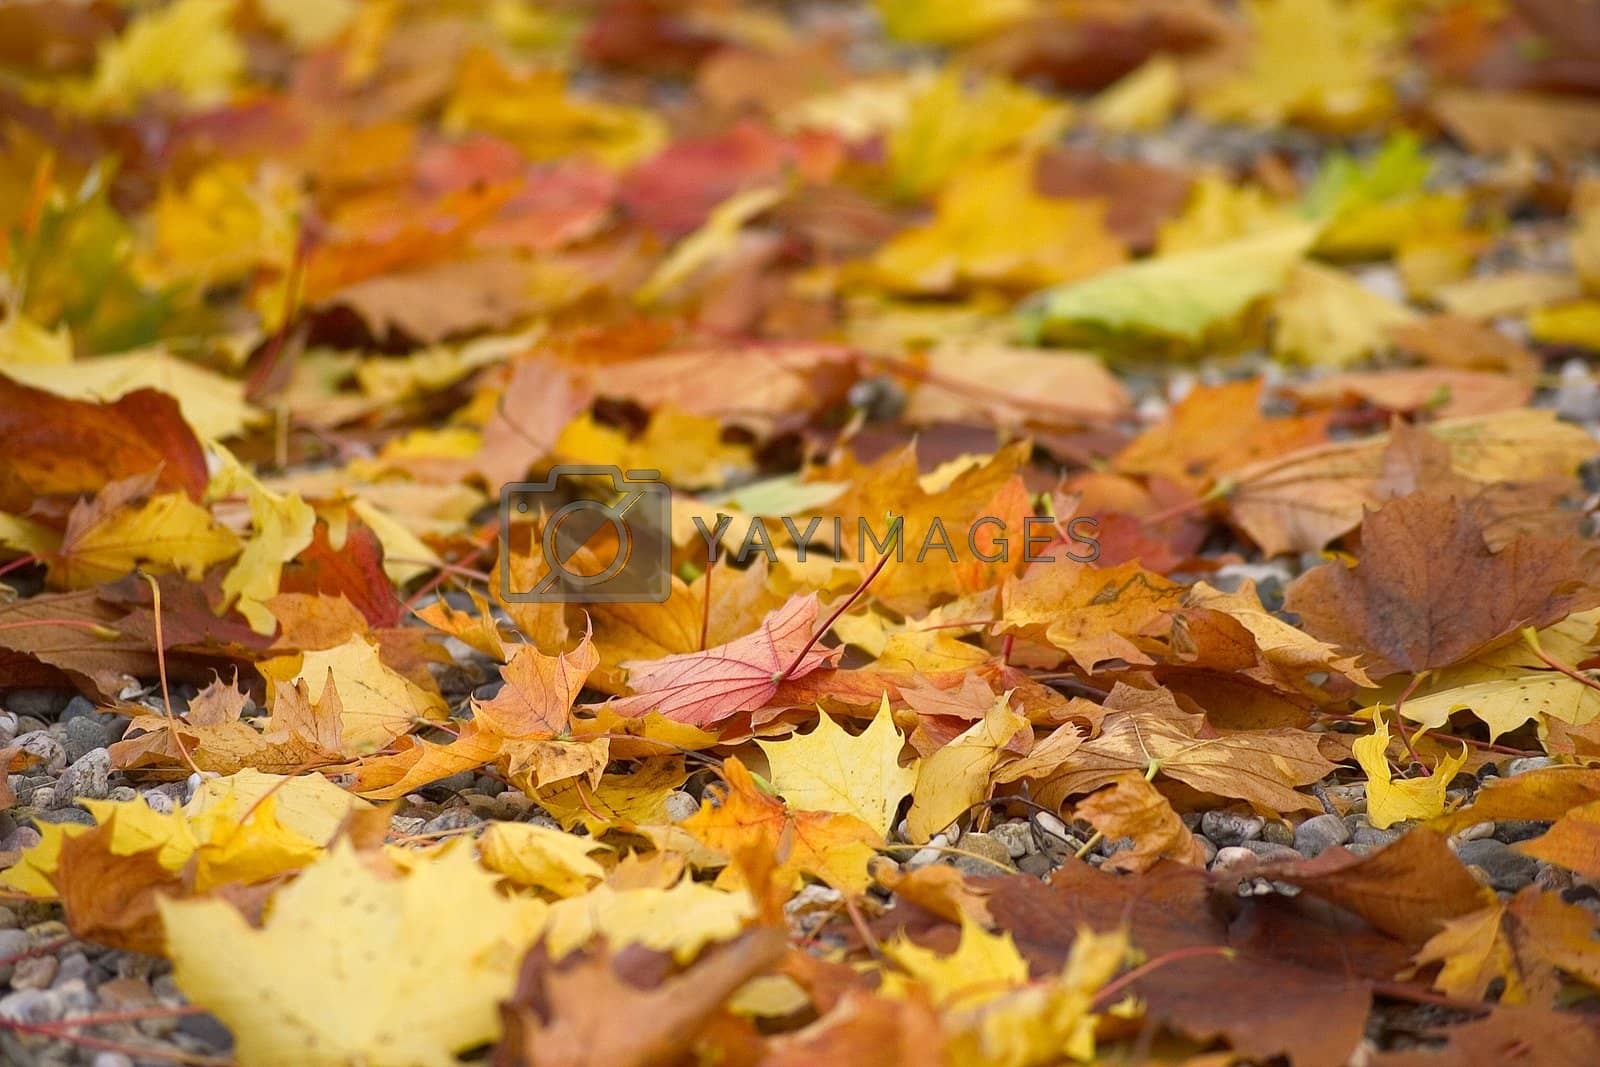 Royalty free image of fallen leaves by miradrozdowski